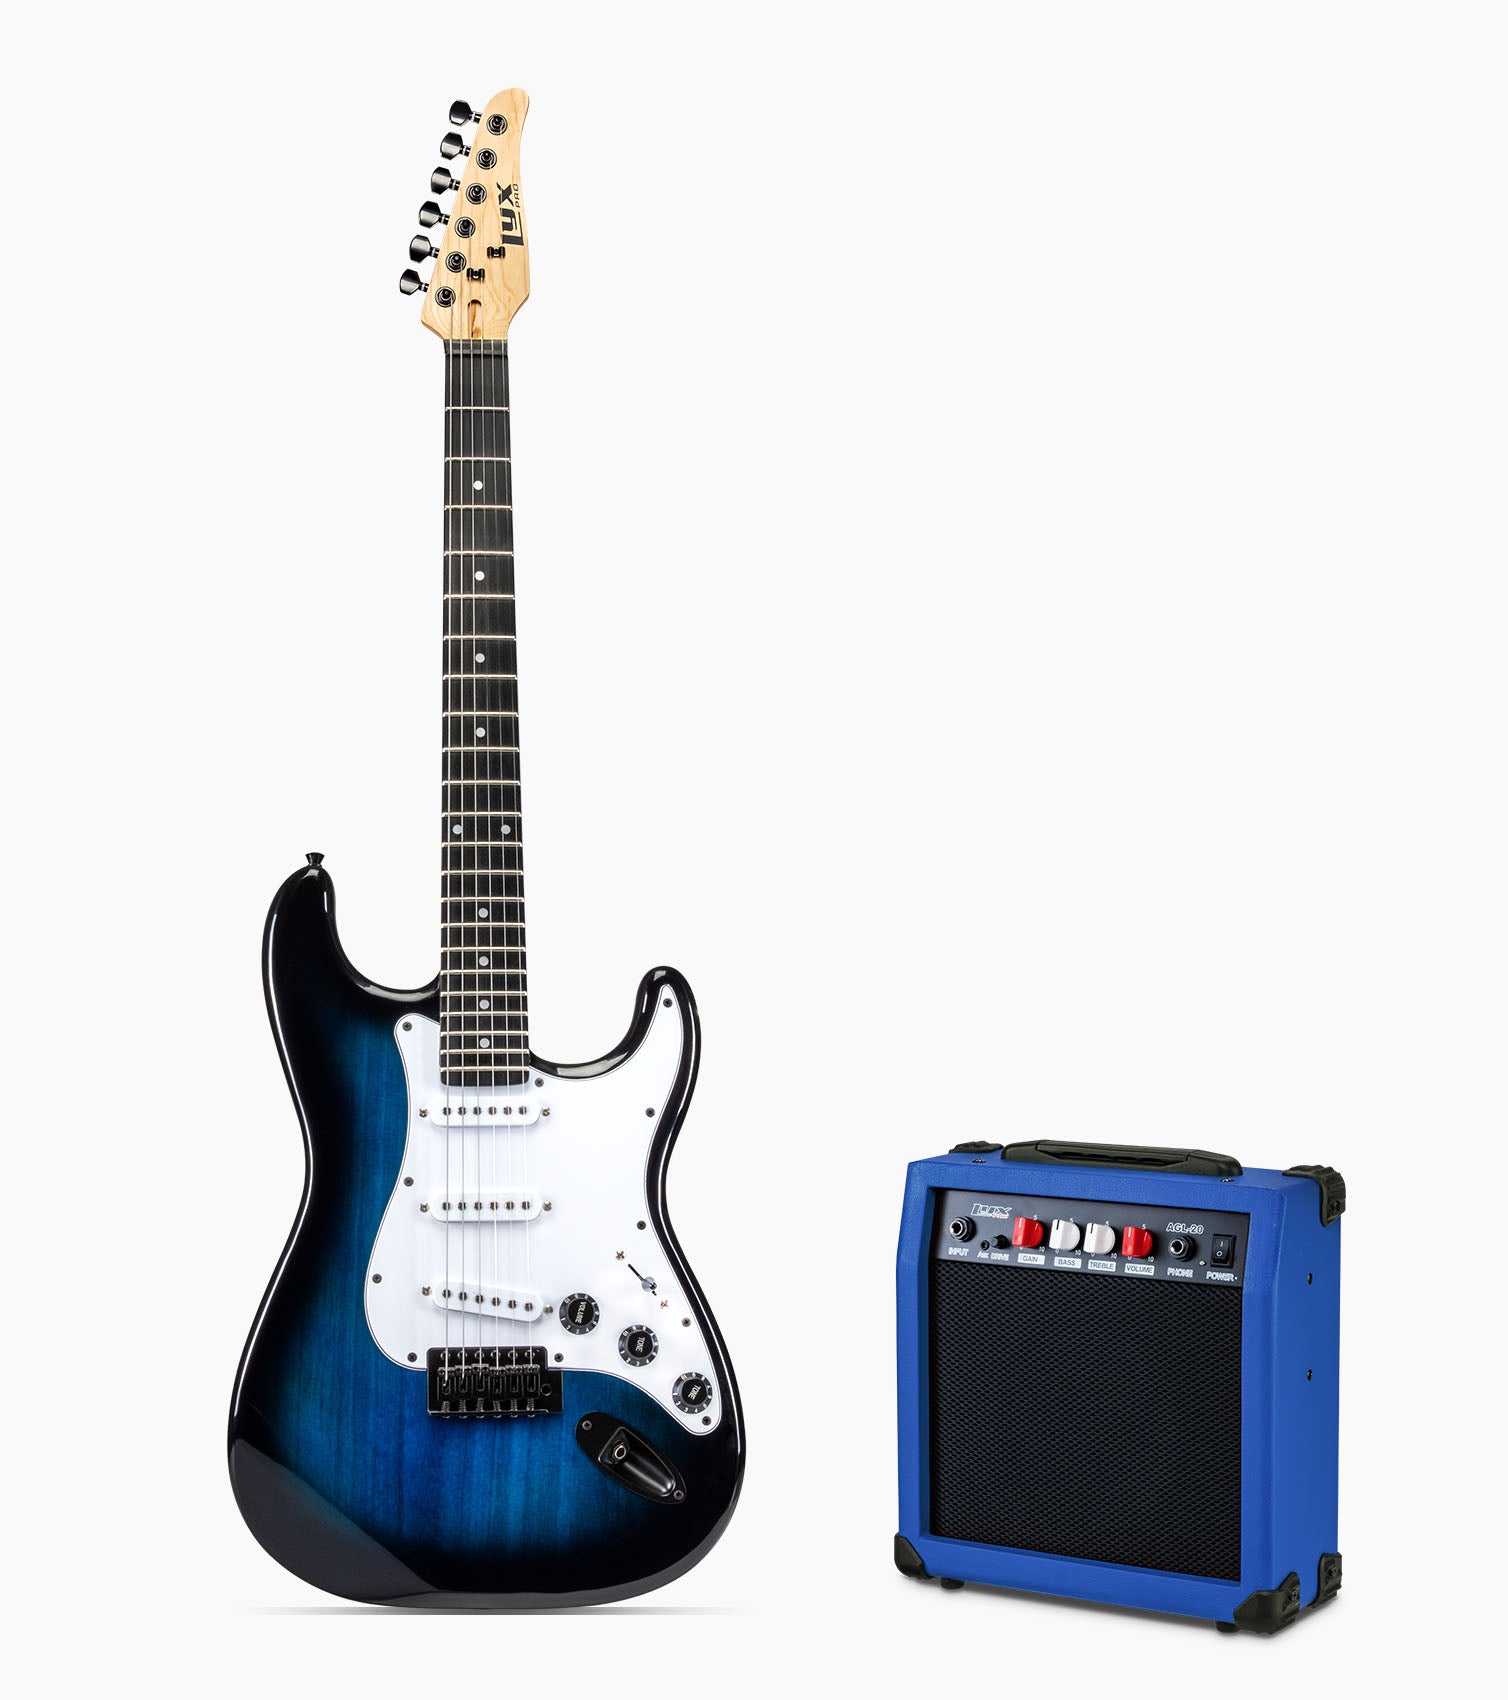 39” Blue beginner electric guitar with amp